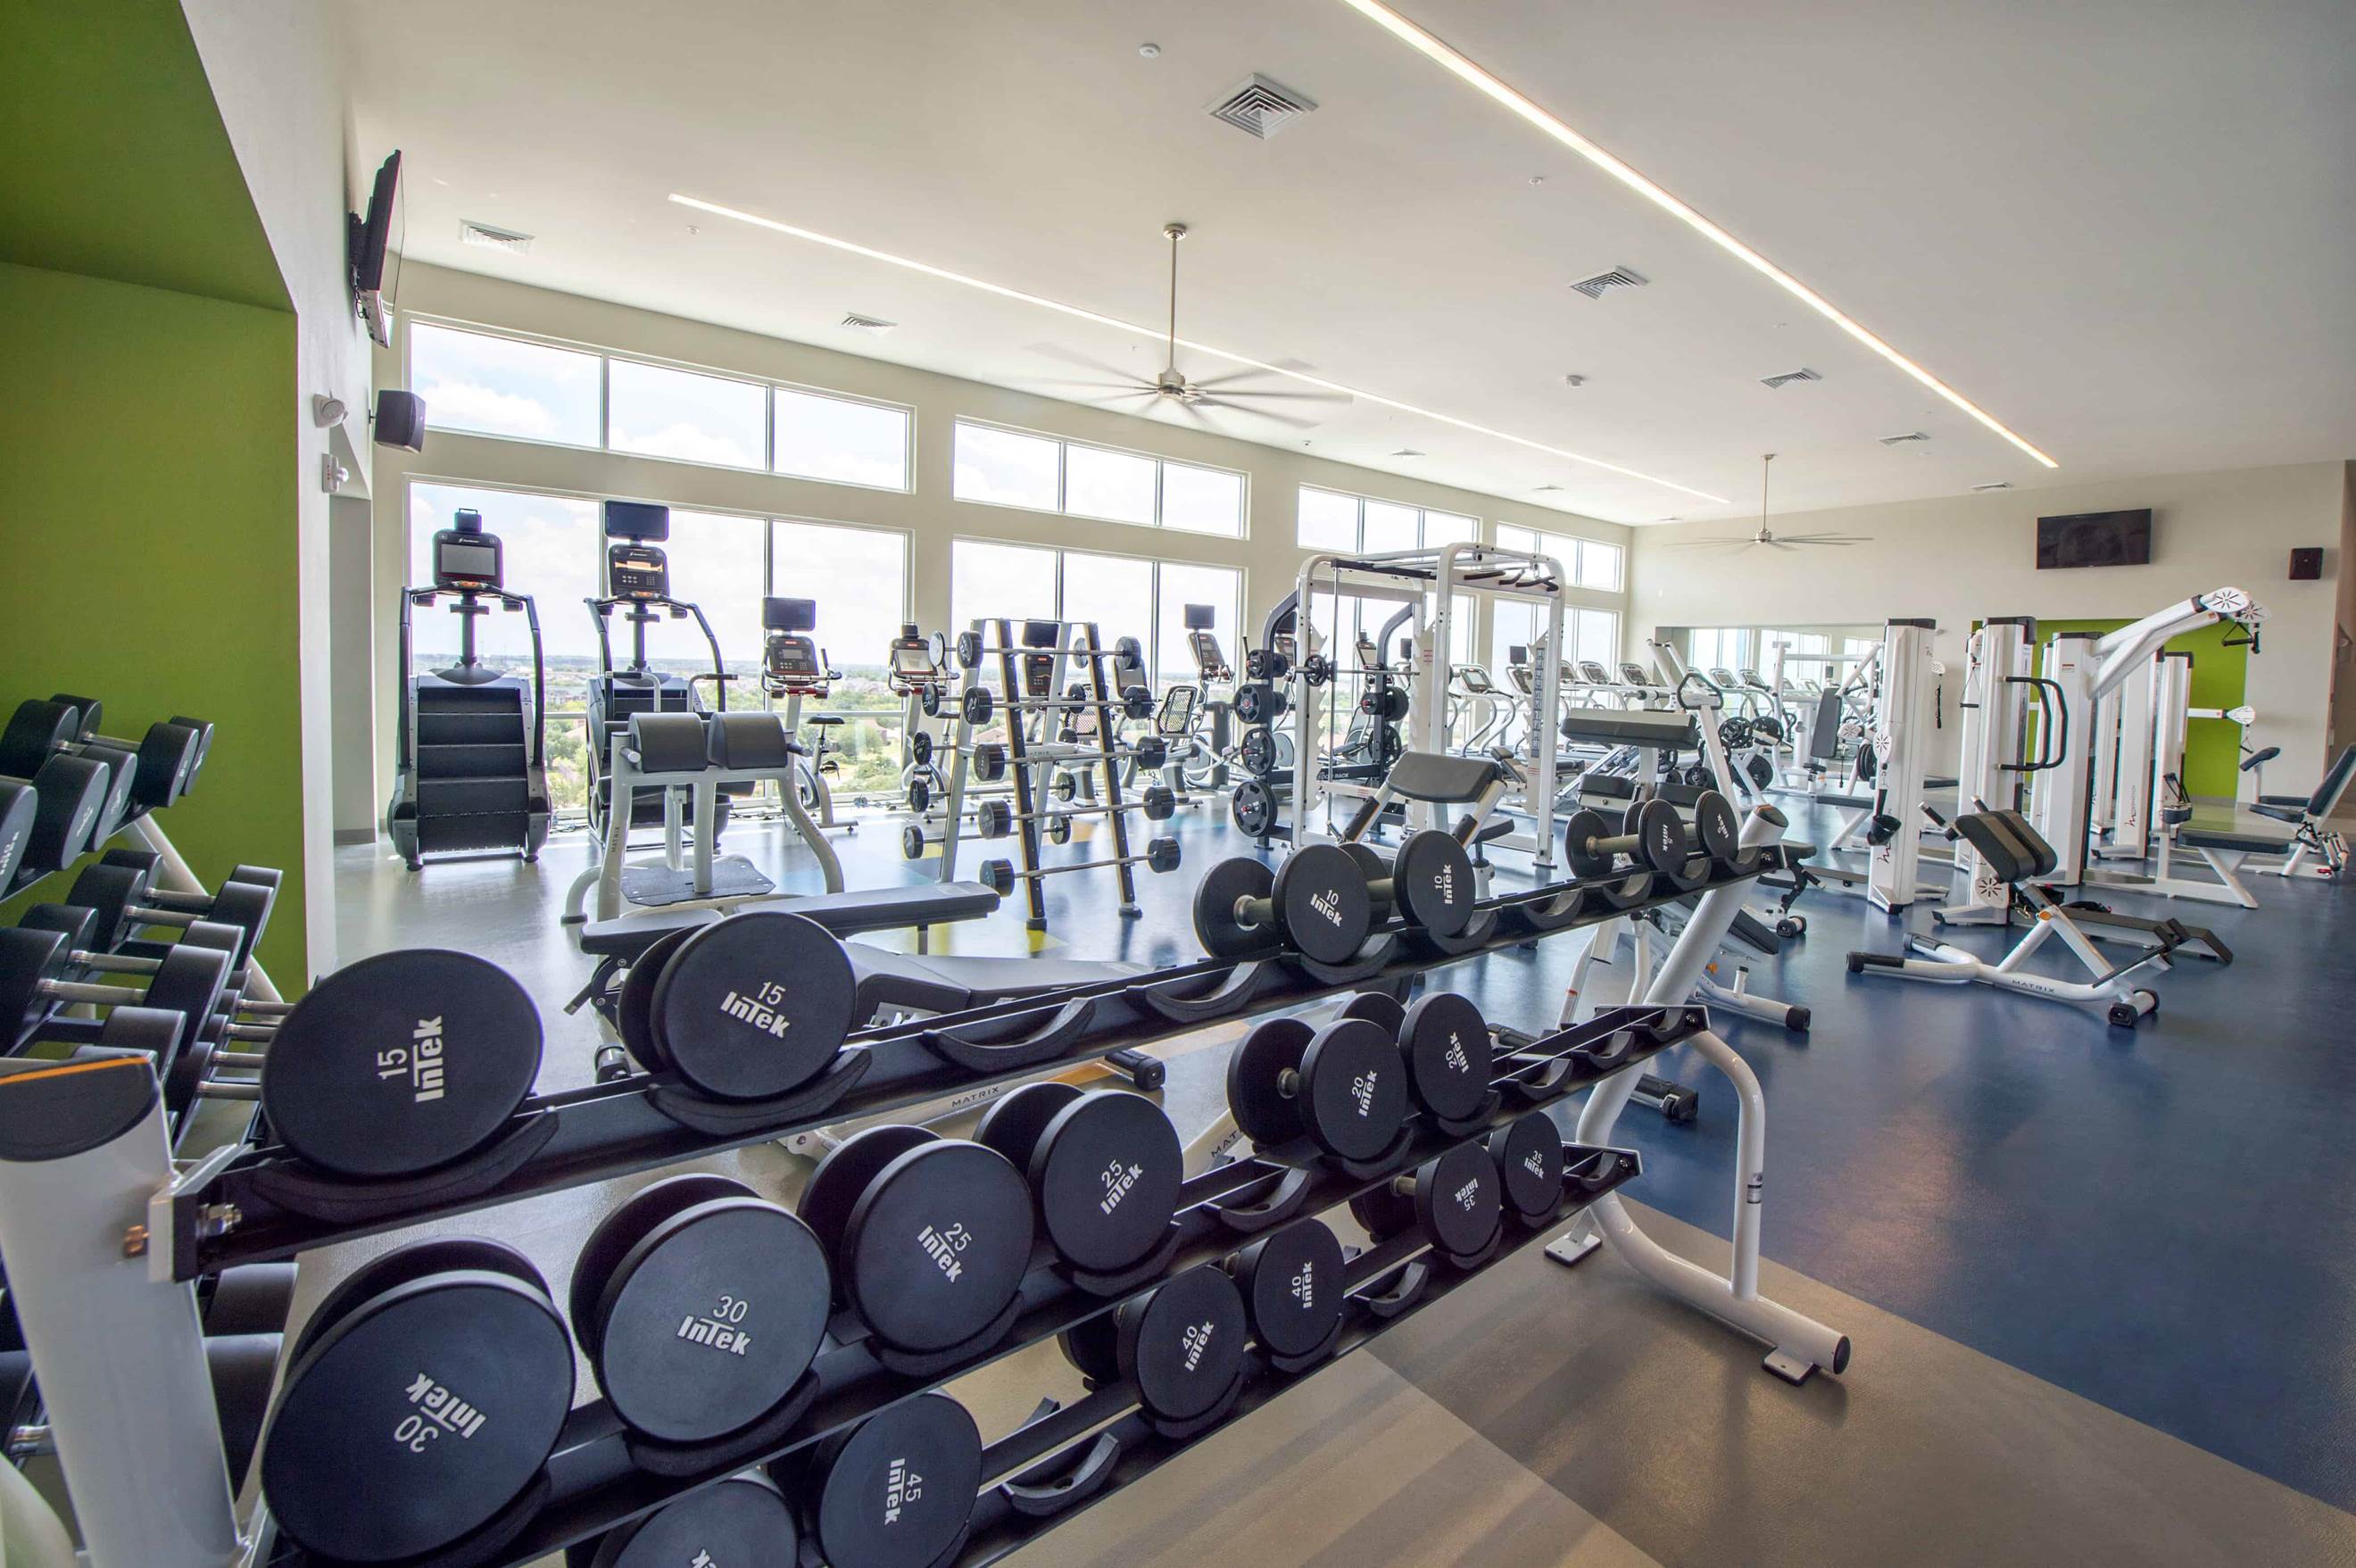 Free weights in college fitness center